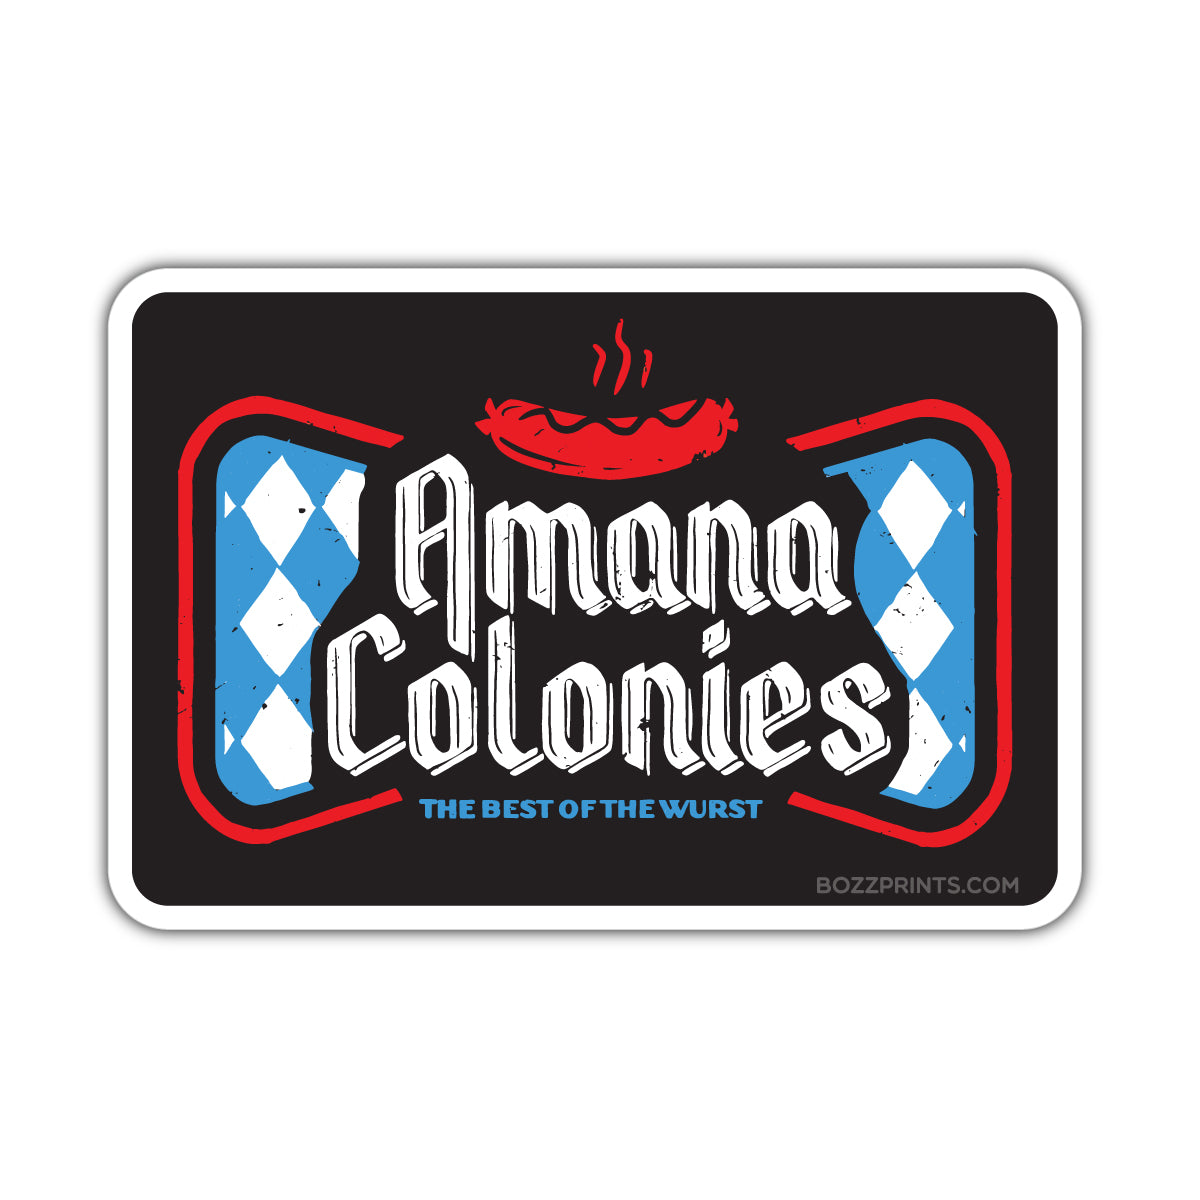 Amana Colonies Best of the Wurst - Bozz Prints